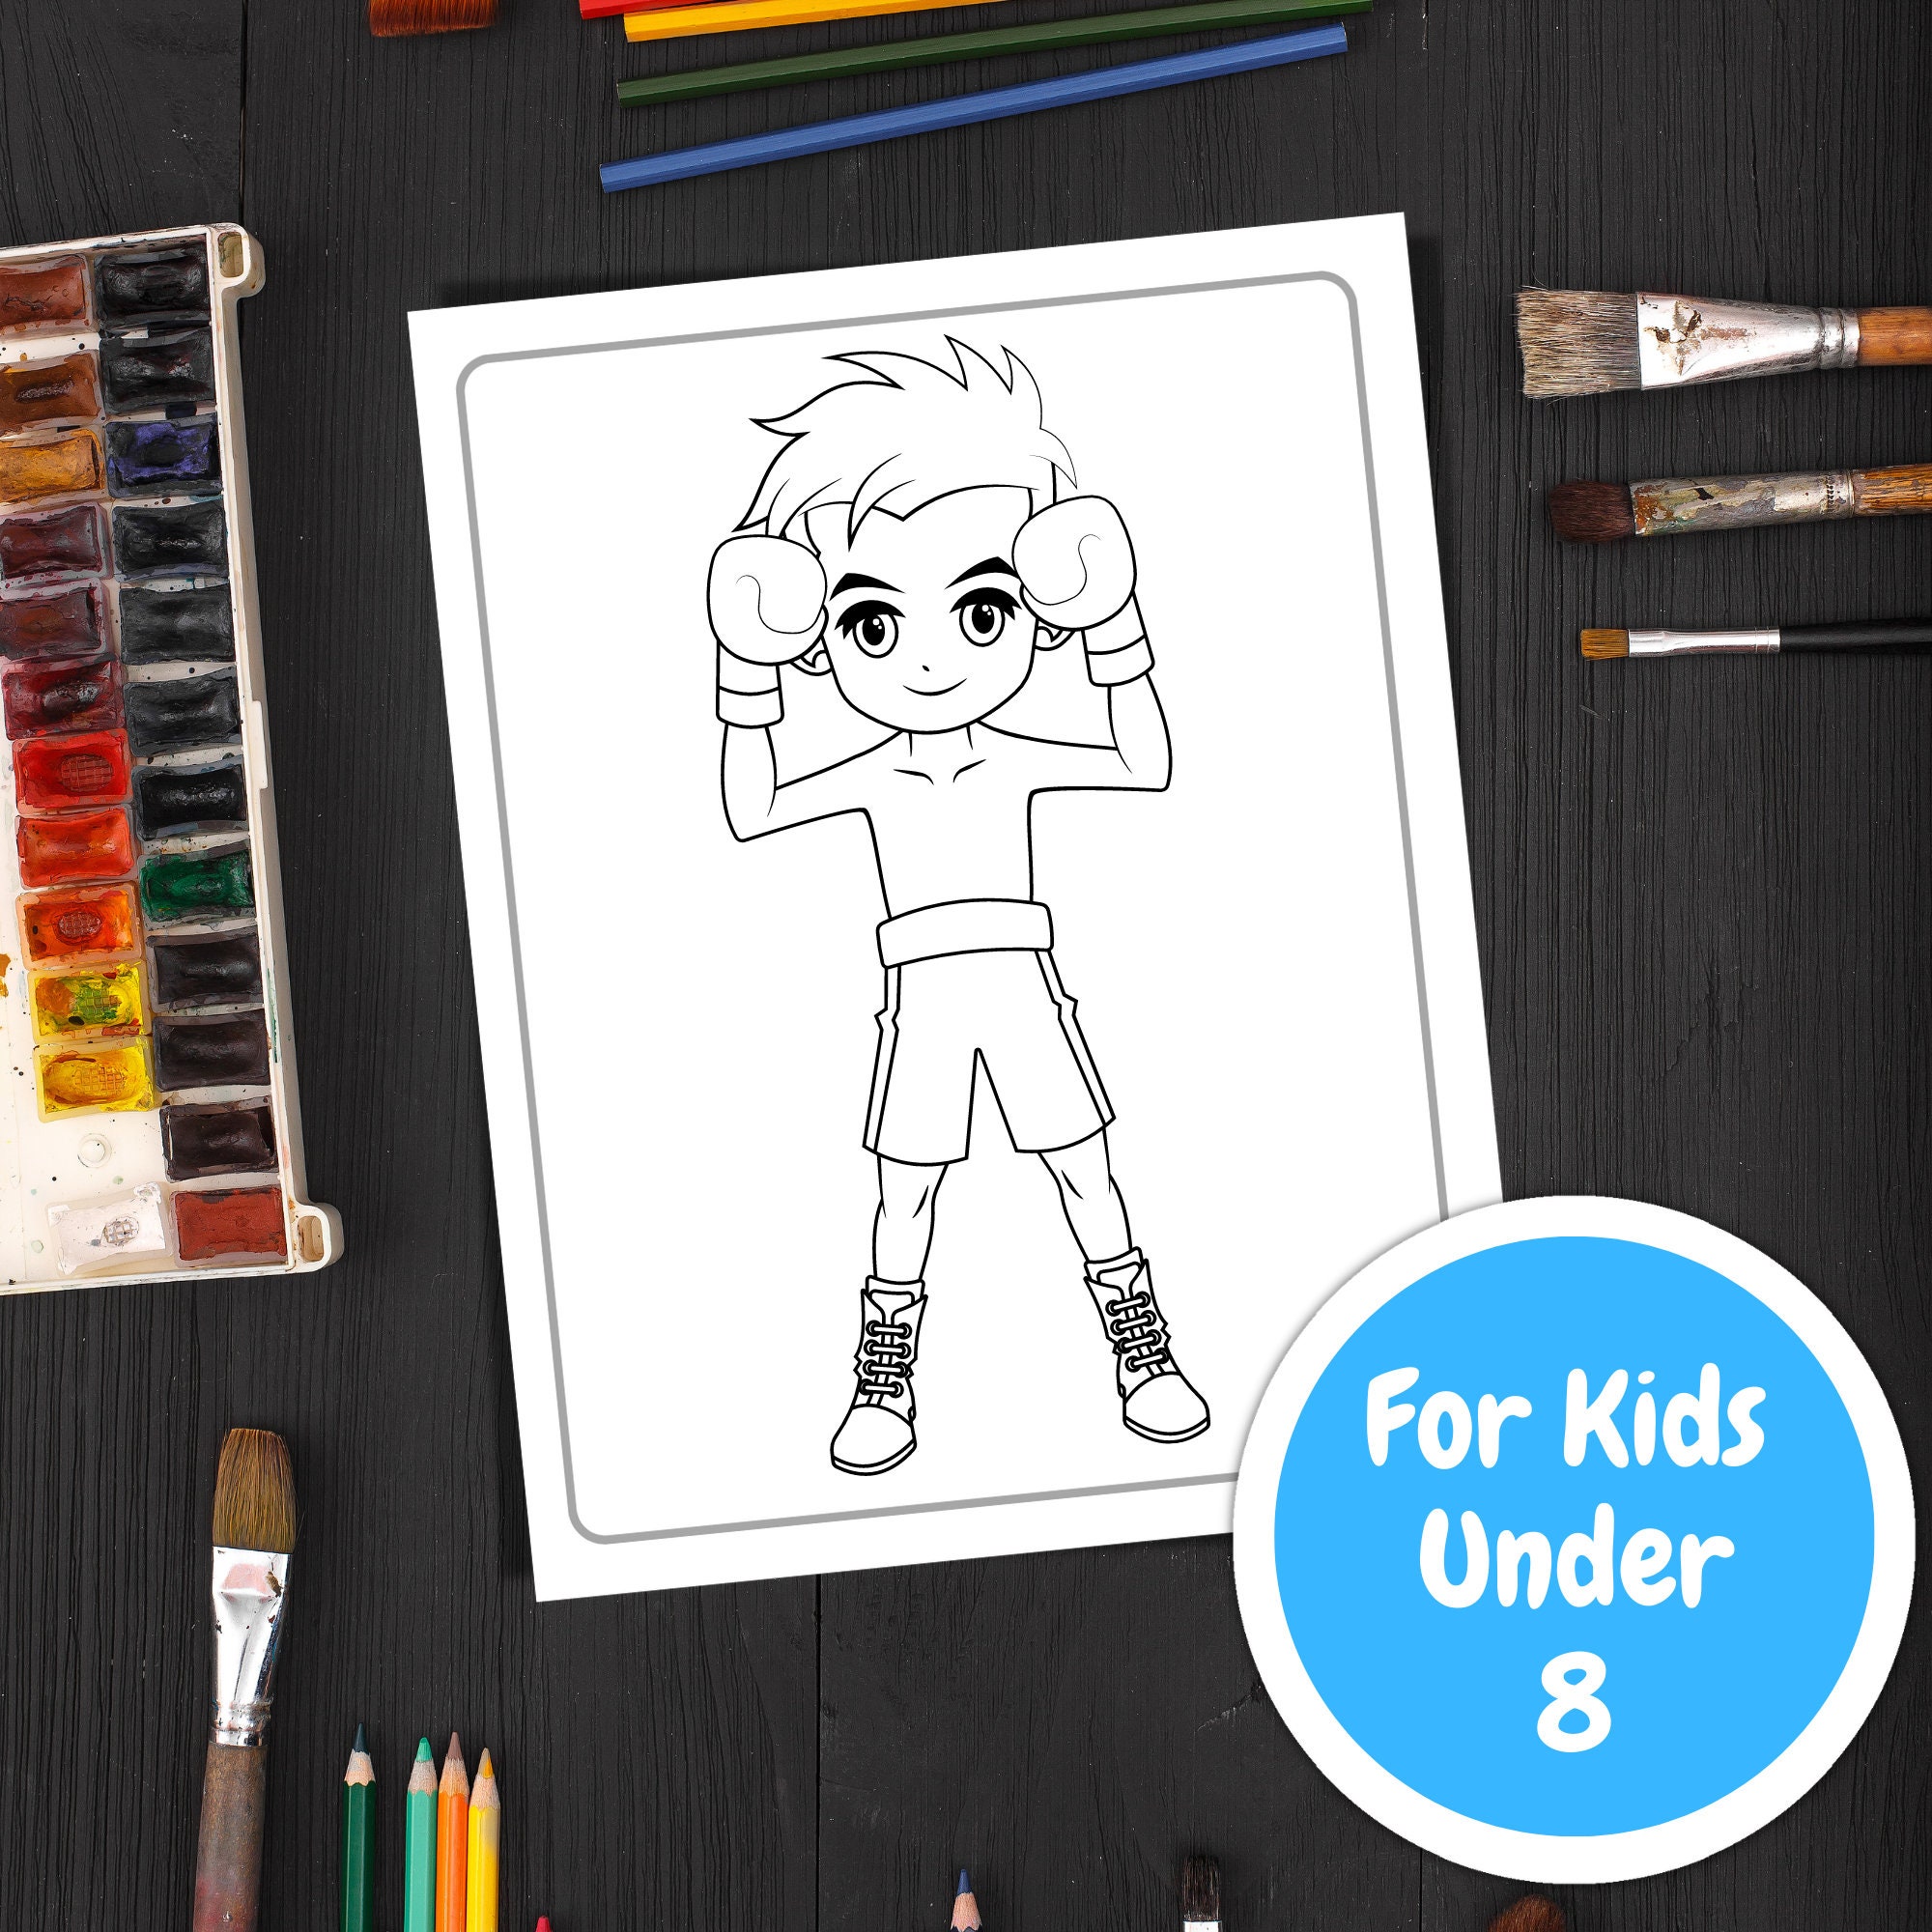 Boxing Coloring Pages for Kids Ages 4-8 by Inkhorse Publishing Kids  Coloring Book With 30 Digital Coloring Pages PDF Download 